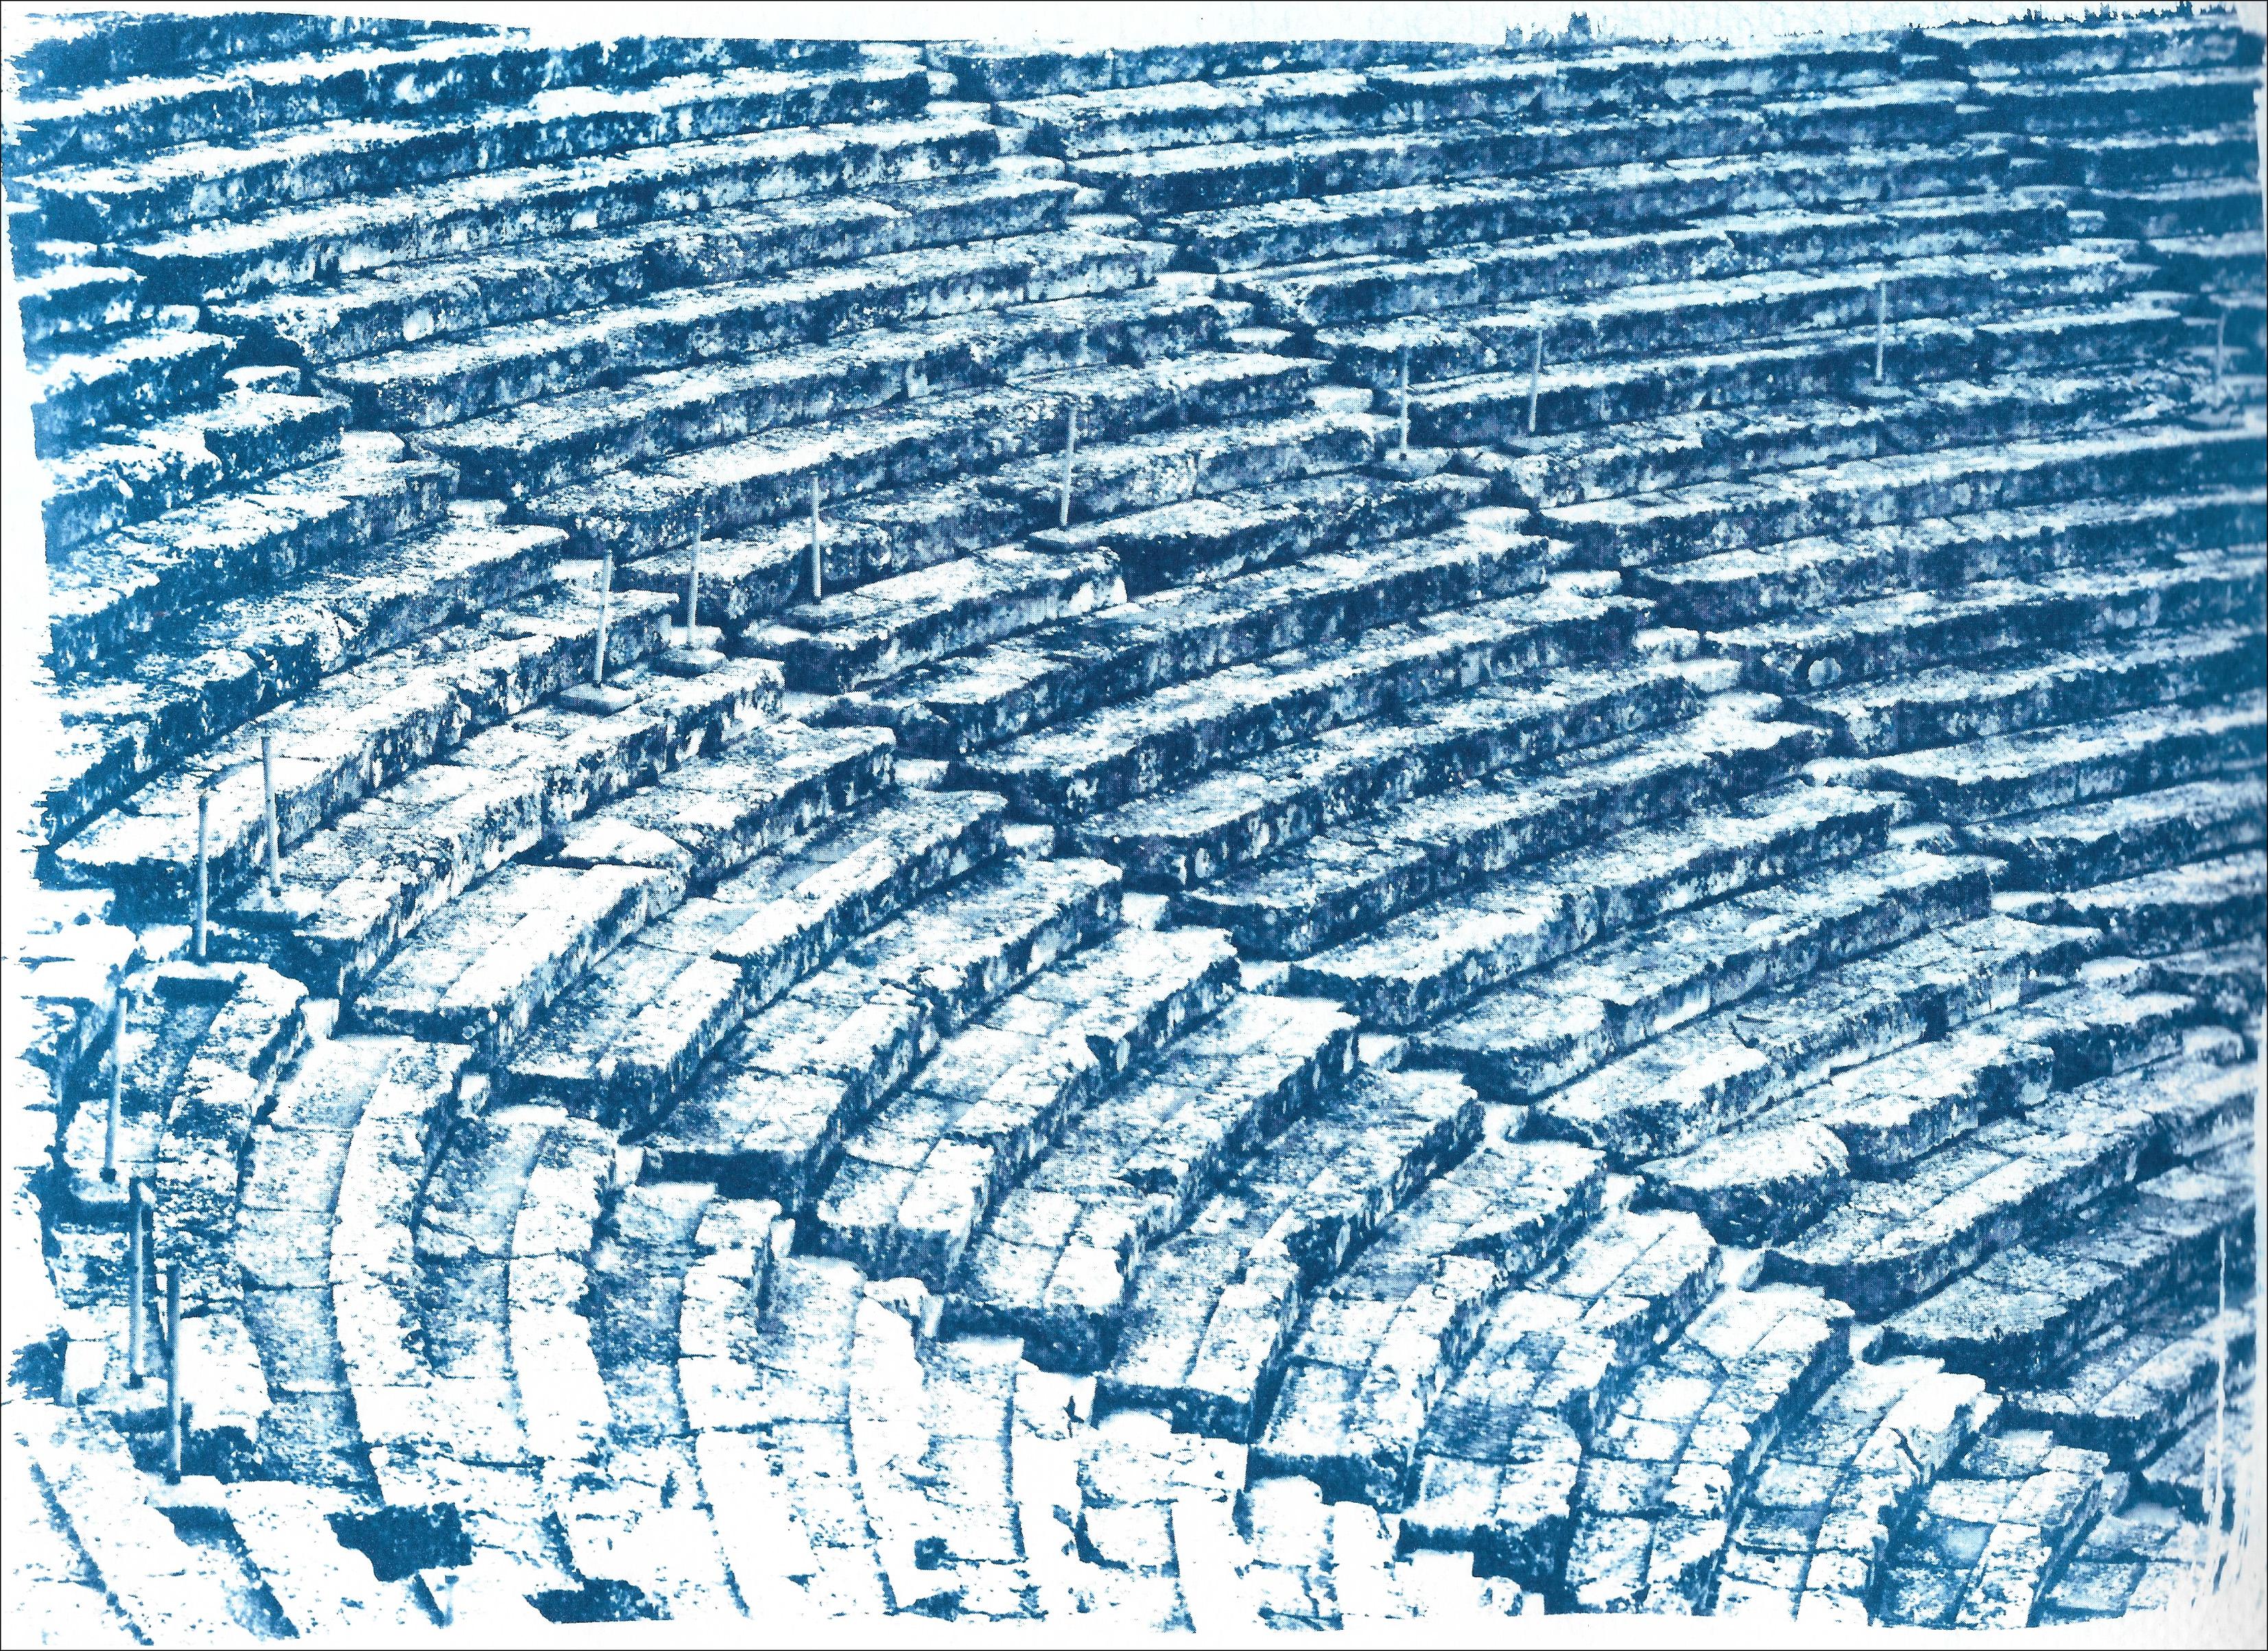 This is an exclusive handprinted limited edition cyanotype.

Details:
+ Title: Diptych of Ancient Theaters
+ Year: 2023
+ Edition Size: 50
+ Stamped and Certificate of Authenticity provided
+ Measurements : Two panels of 70x100 cm (28x 40 in.), a